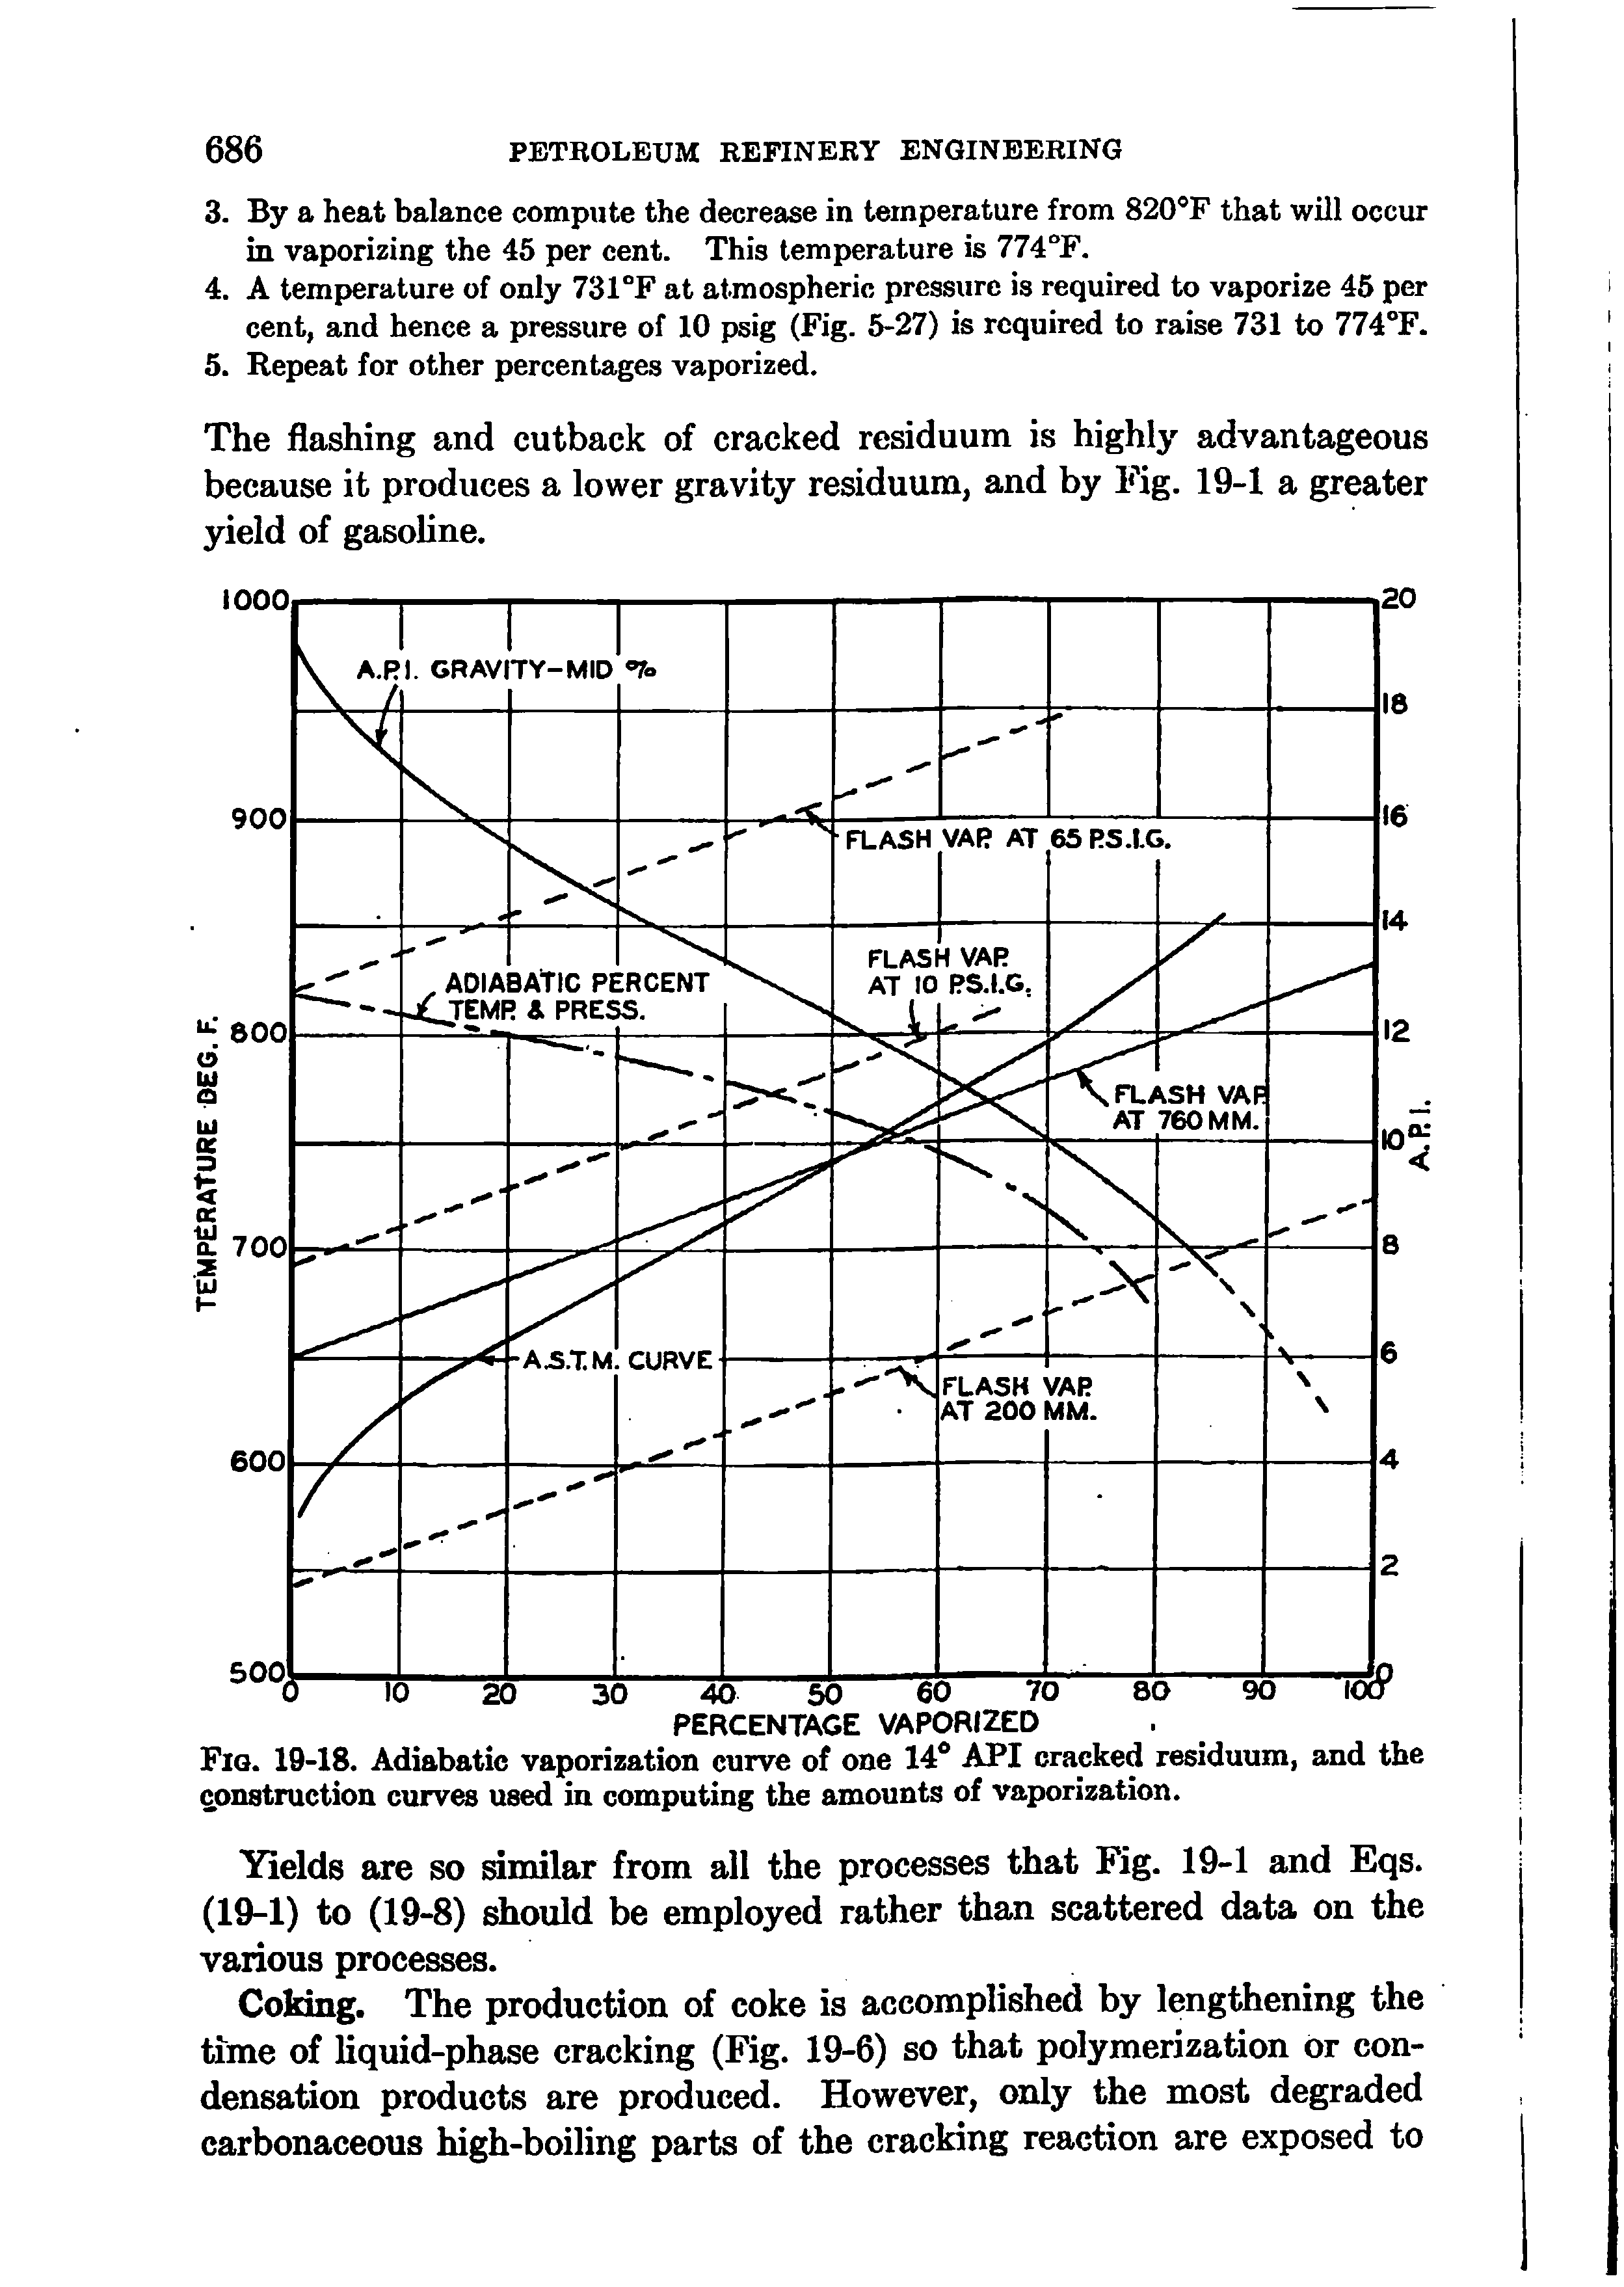 Fig. 19-18. Adiabatic vaporization curve of one 14 API cracked residuum, and the construction curves used in computing the amounts of vaporization.